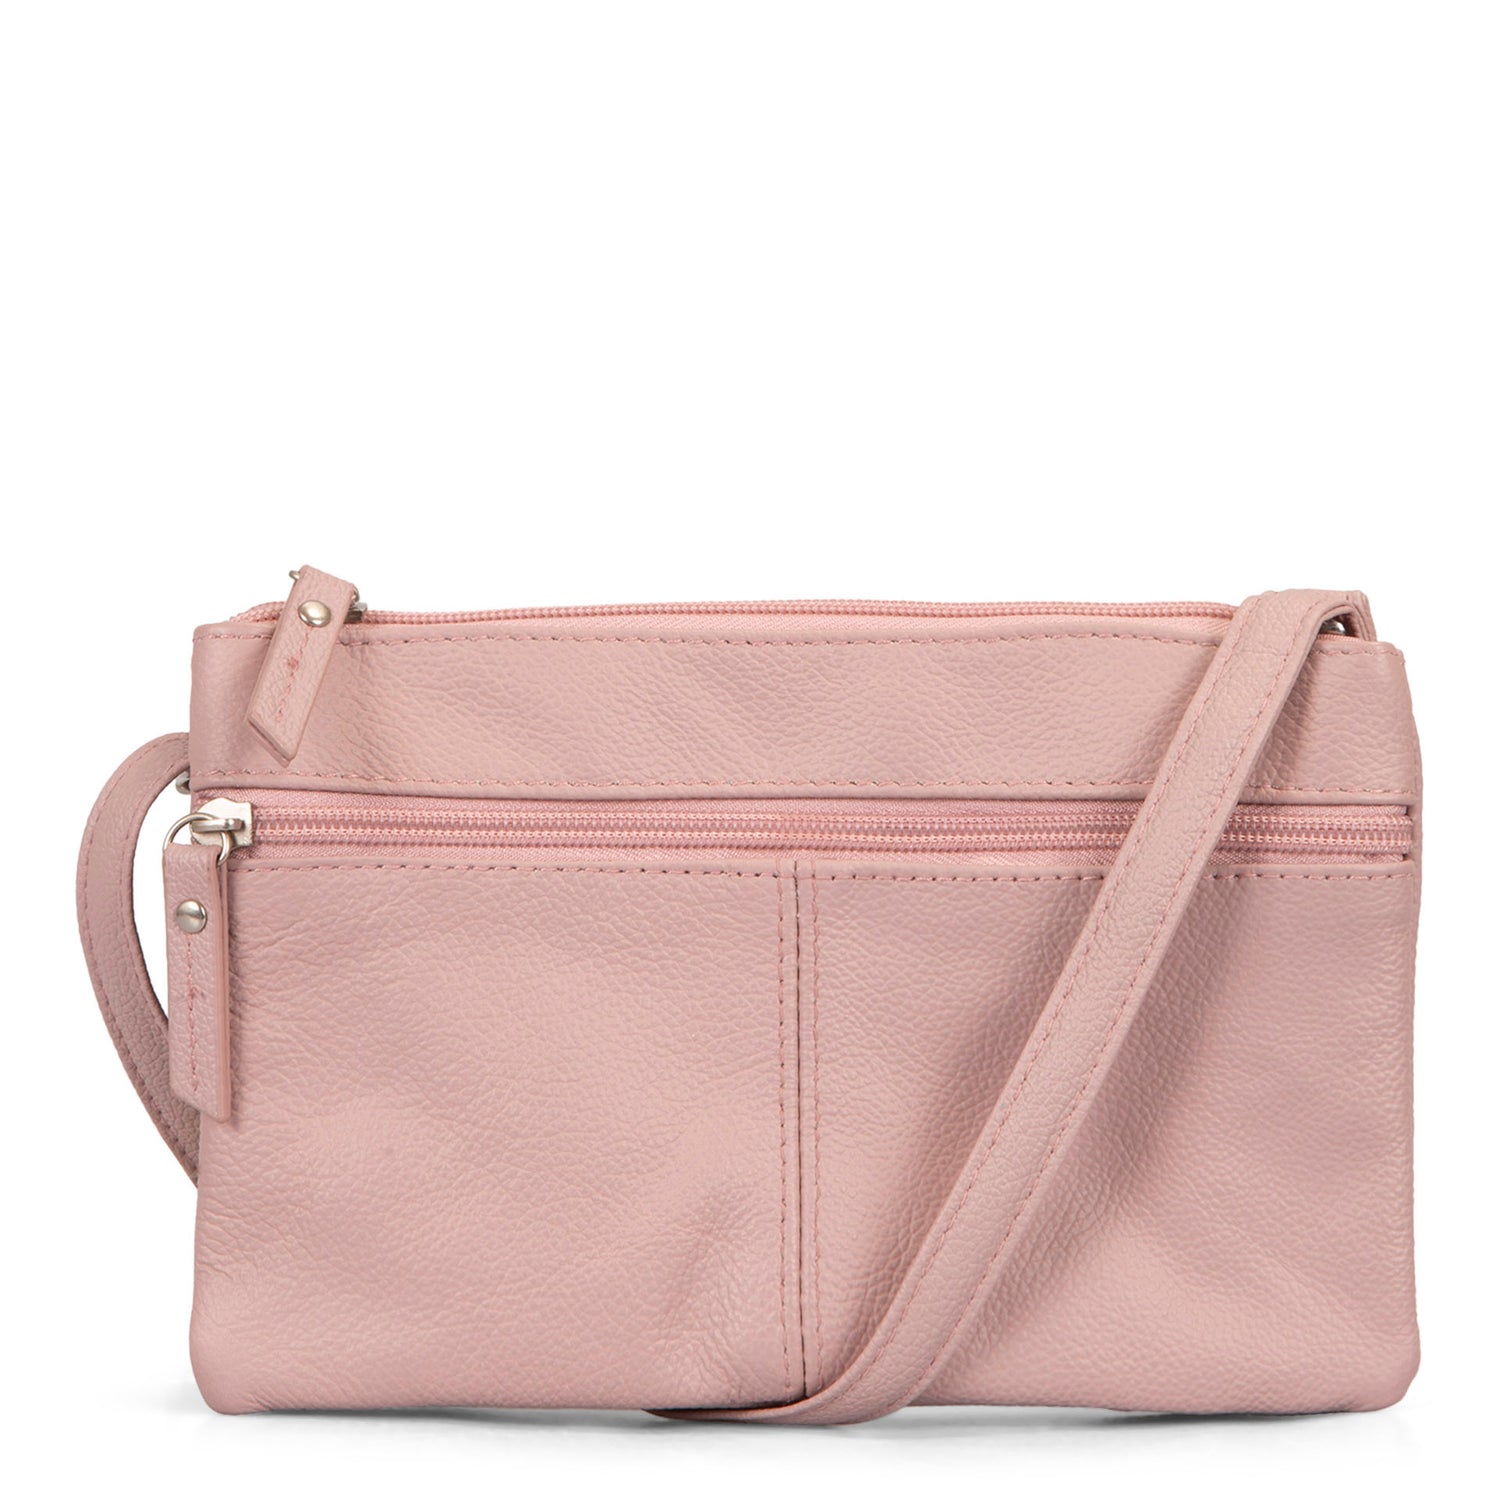 Small Purse Leather Crossbody Bag Small Bag for Essentials. 